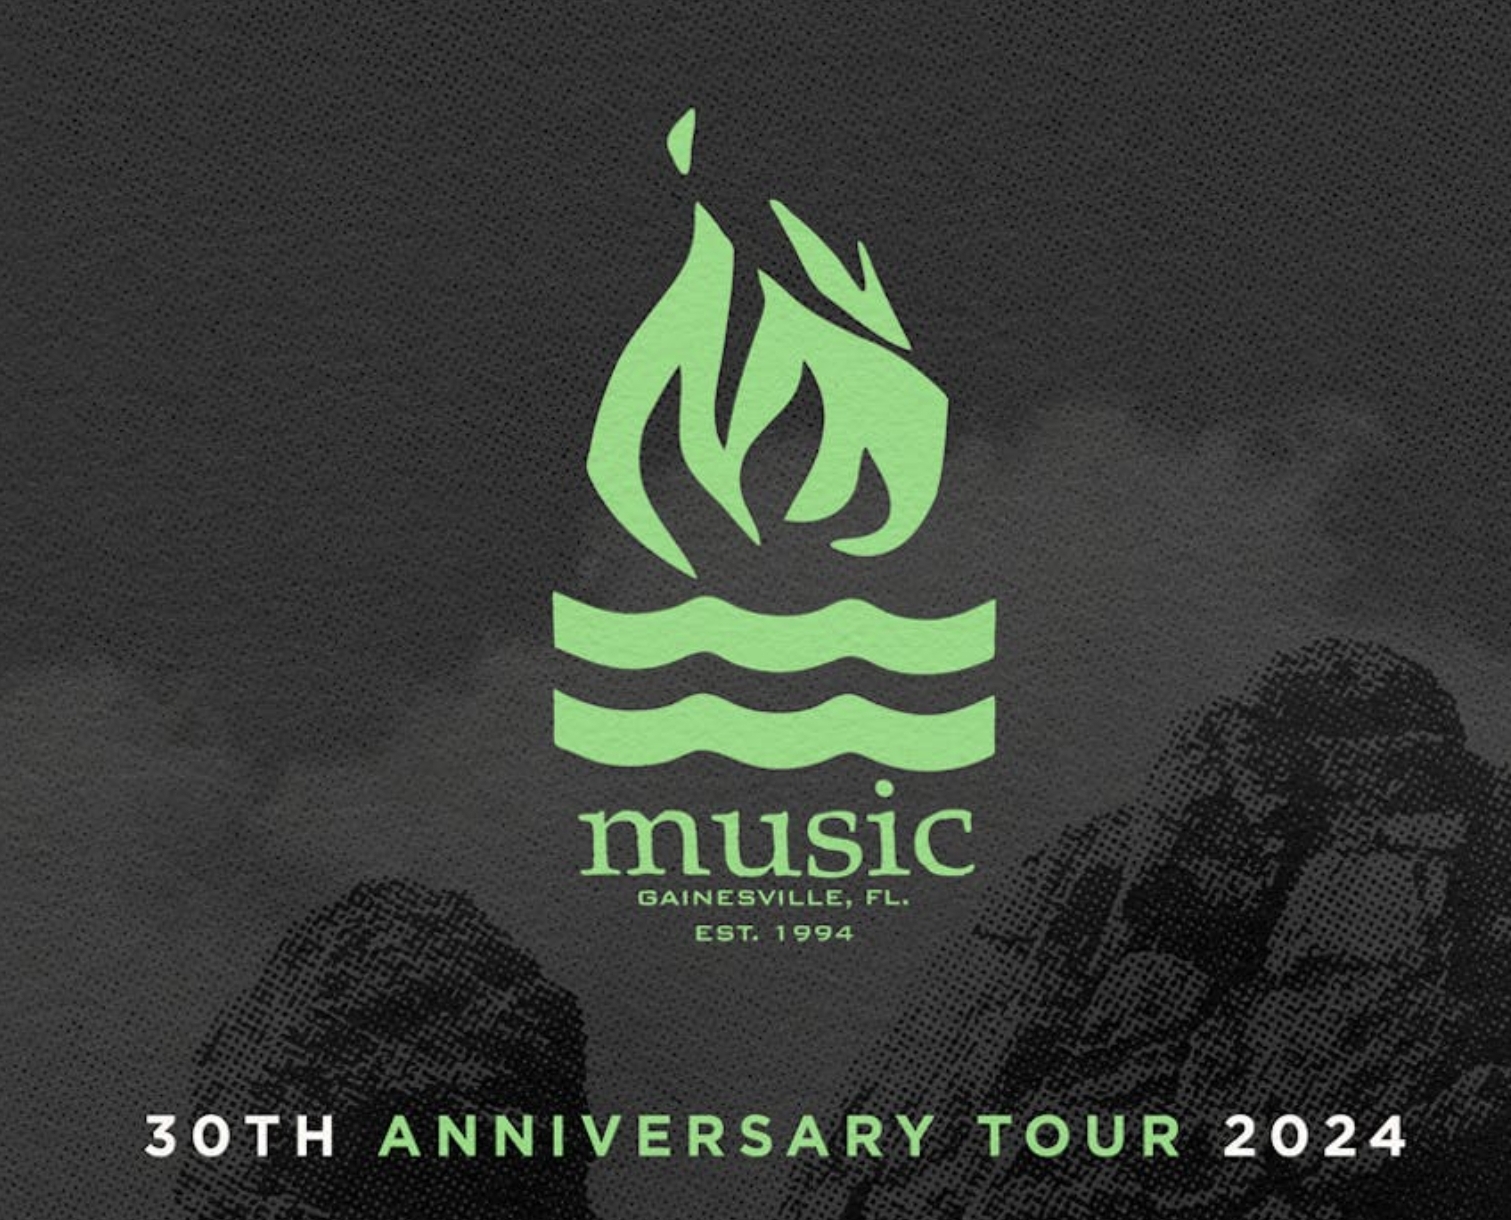 Hot Water Music - 30th Anniversary Tour 2024 en Skaters Palace Tickets